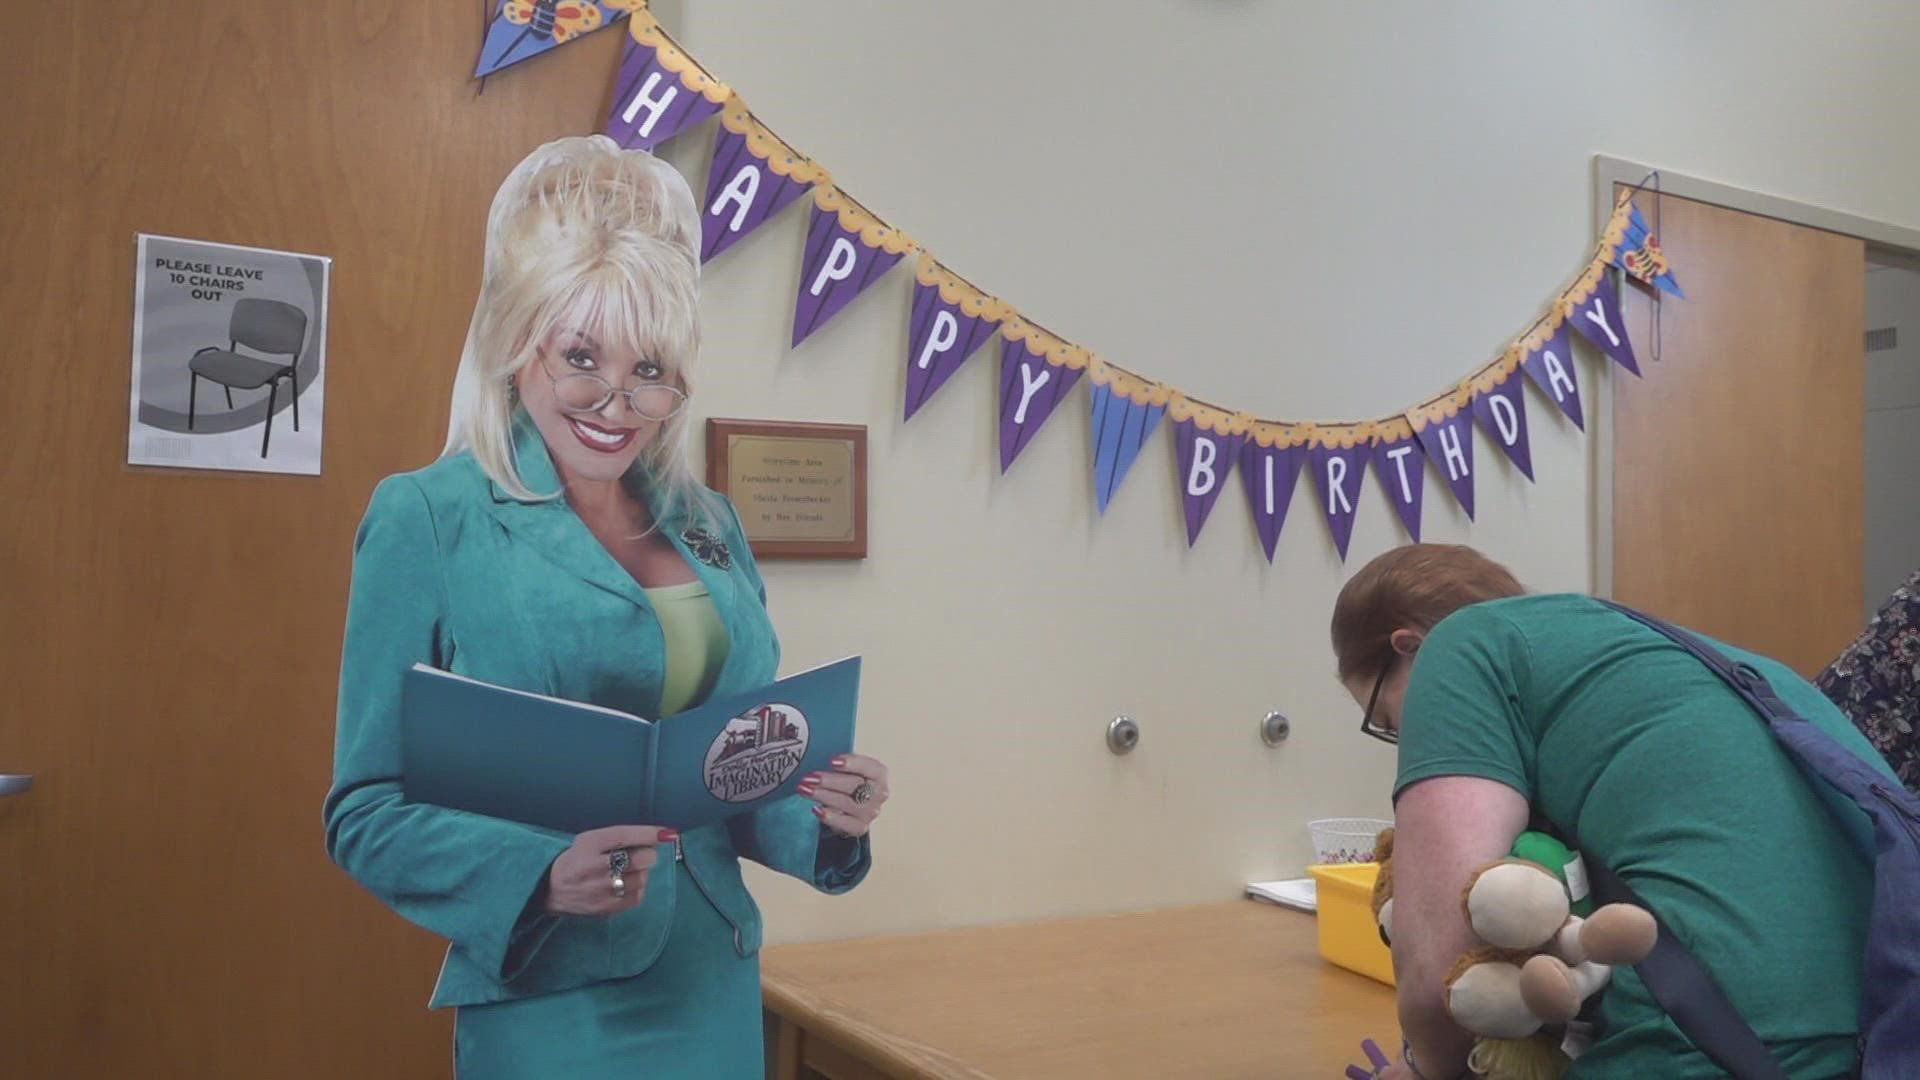 The Knox County Public Libraries honored Dolly on her birthday with events at its several branches.